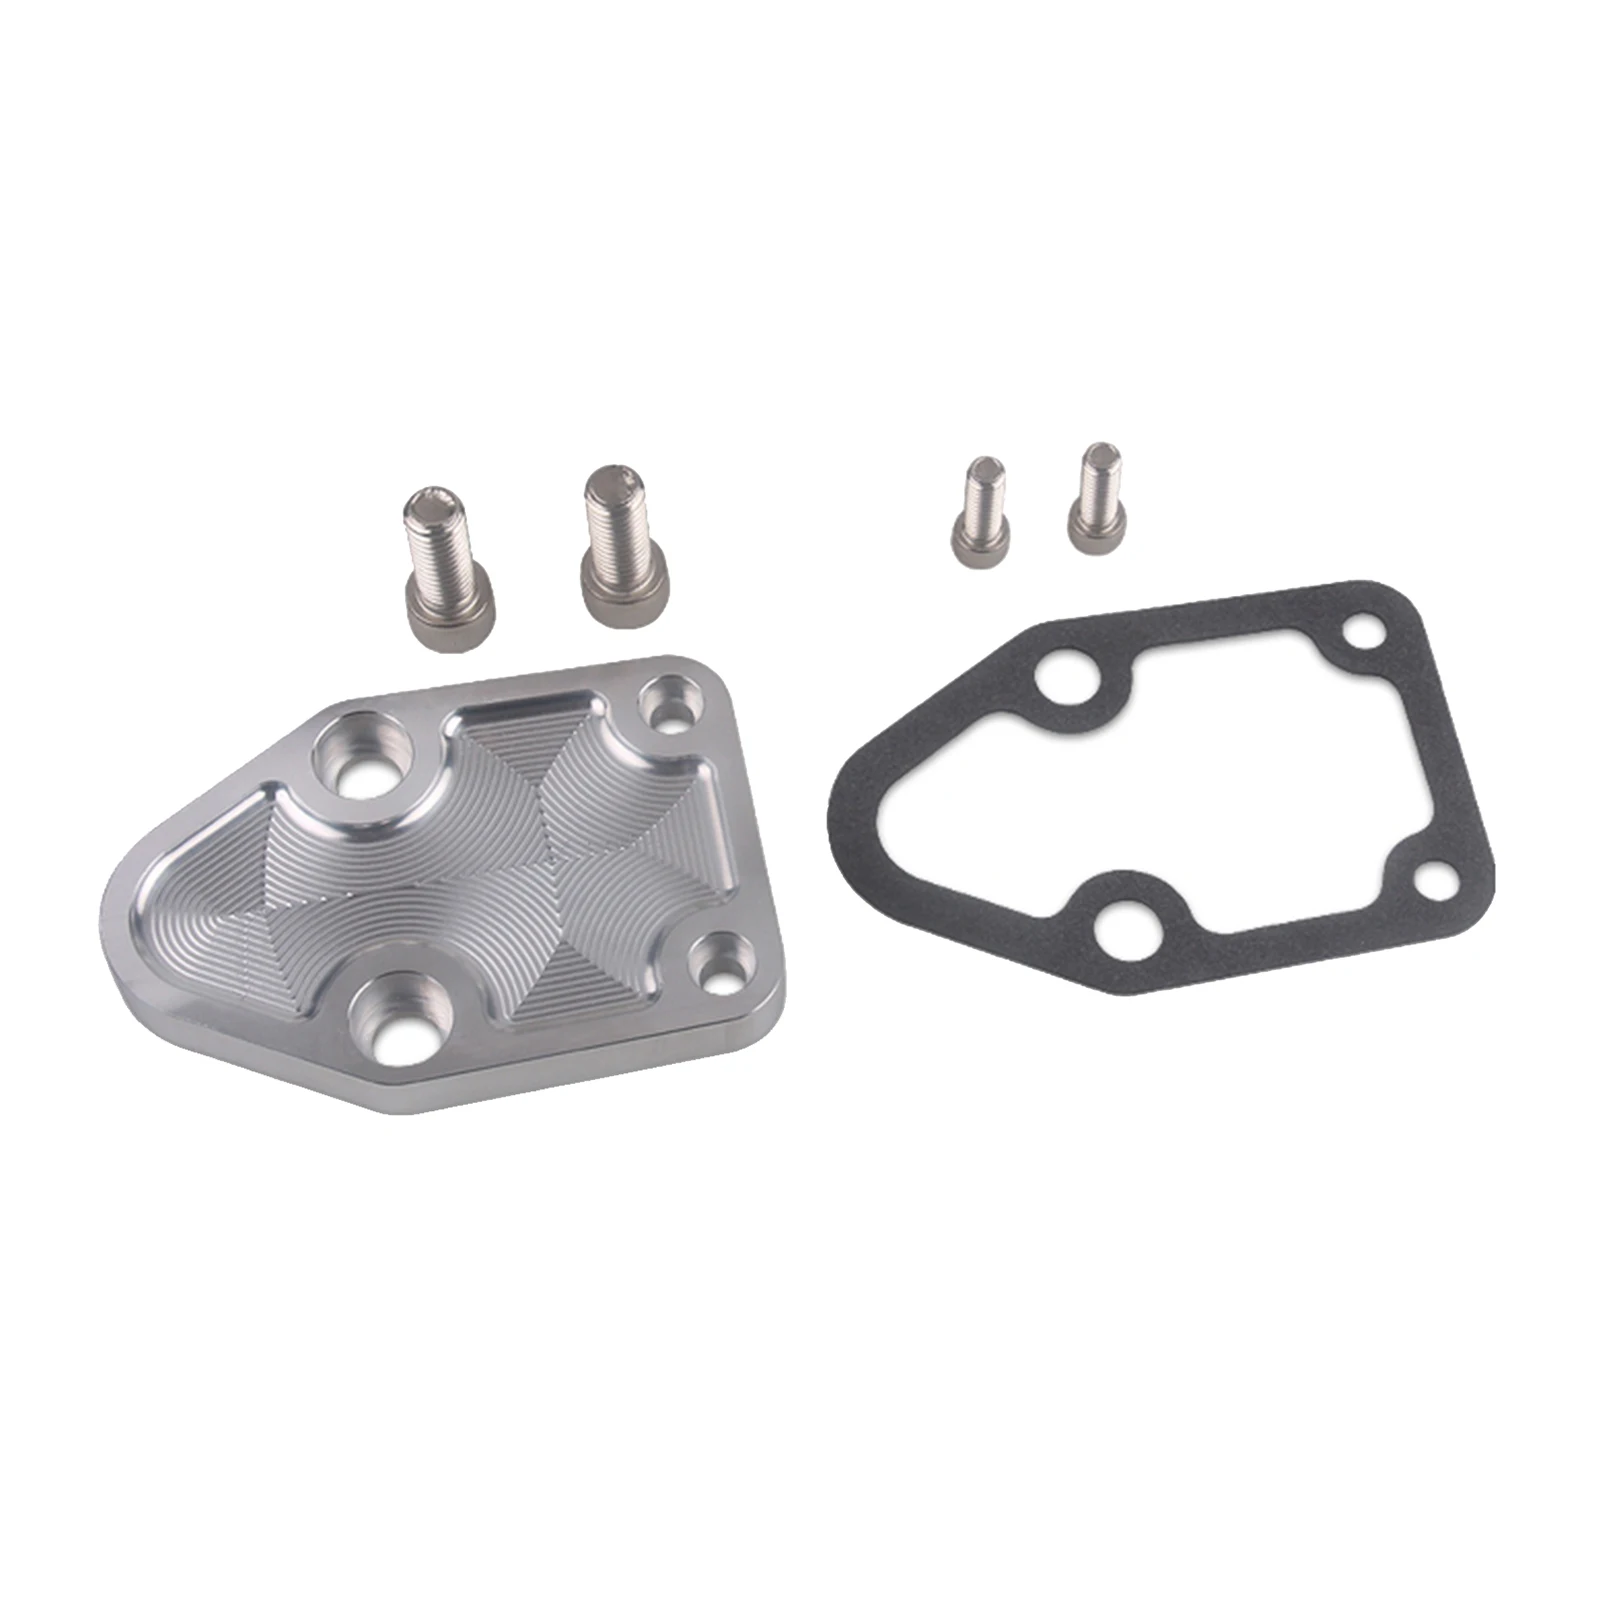 Fuel Pump Mounting Plate Kit Replacement for CHEVY 283 305 327 350 383 400